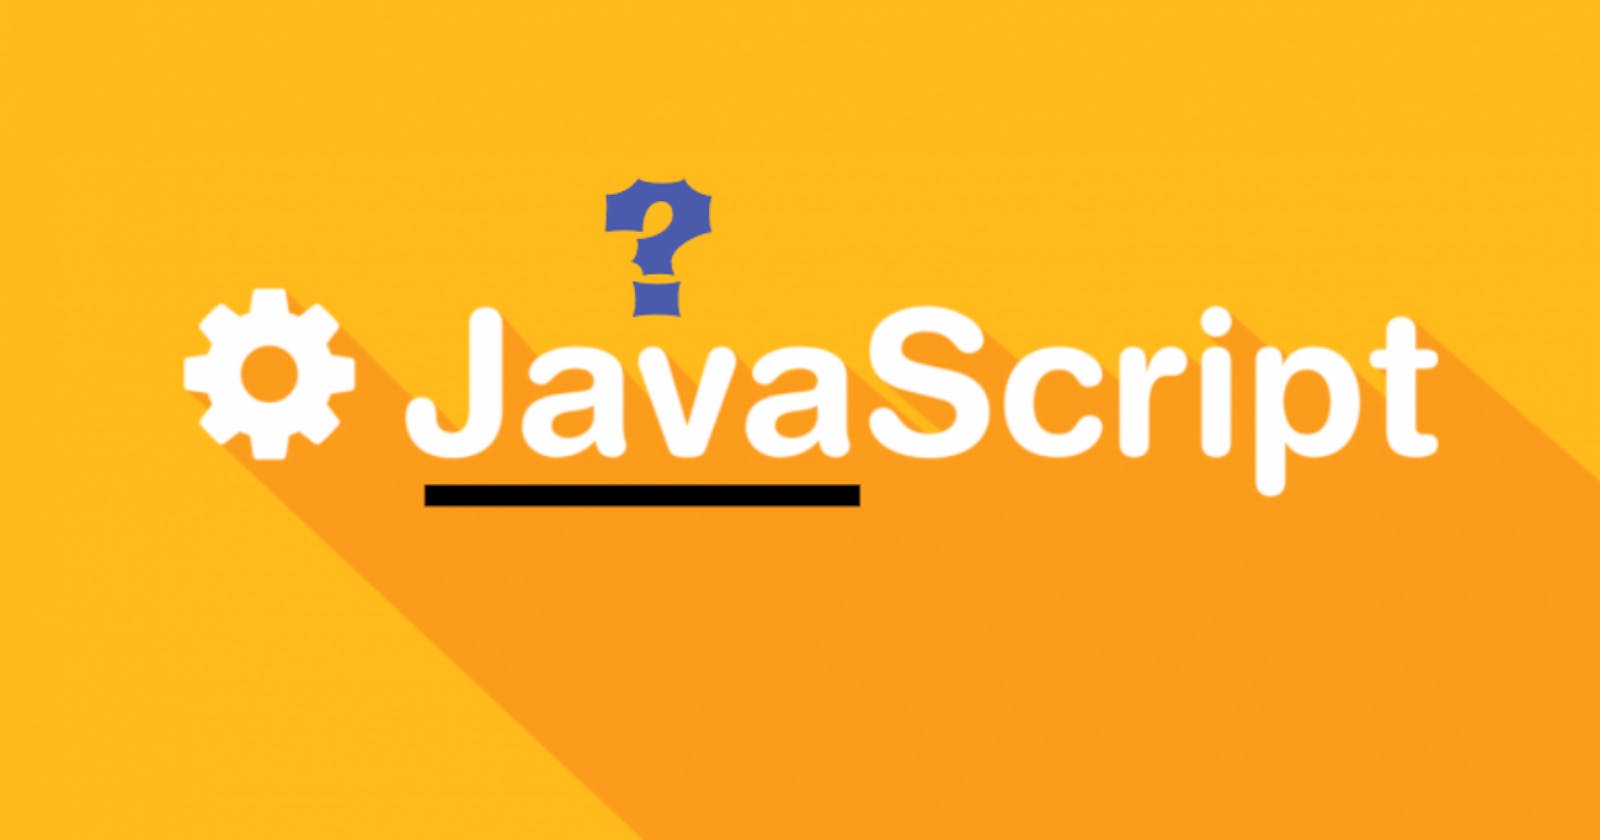 What is a JavaScript Library?